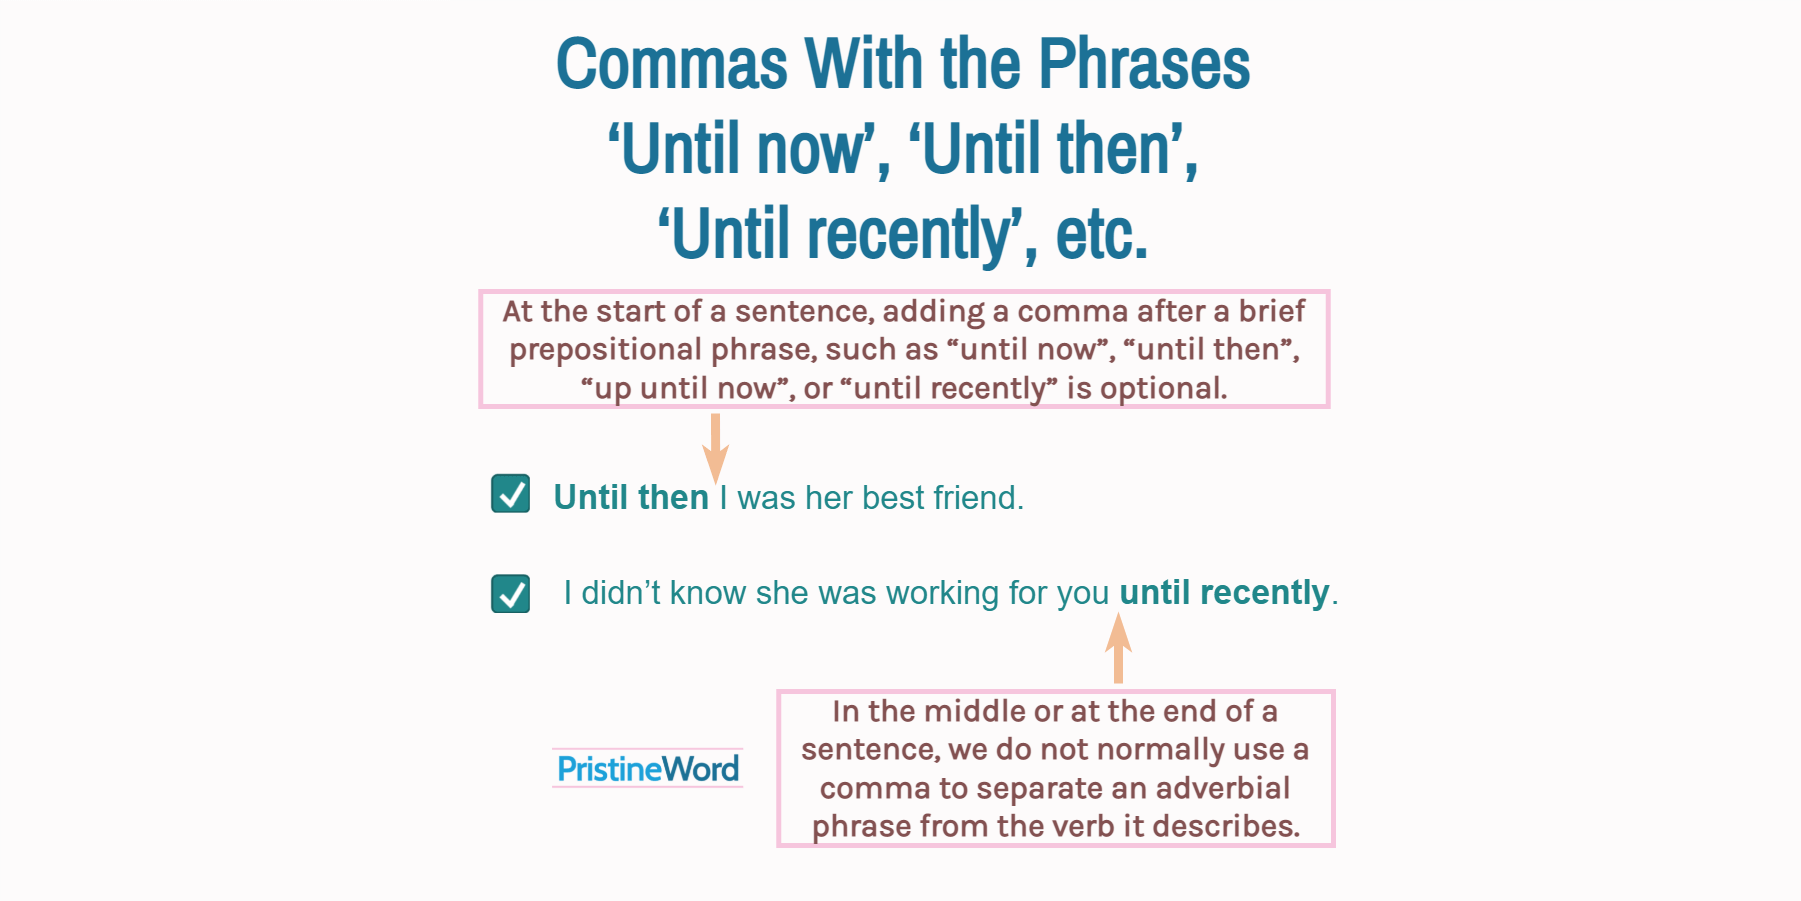 Commas With the Phrases 'Until now', 'Until then', 'Up until now', etc.